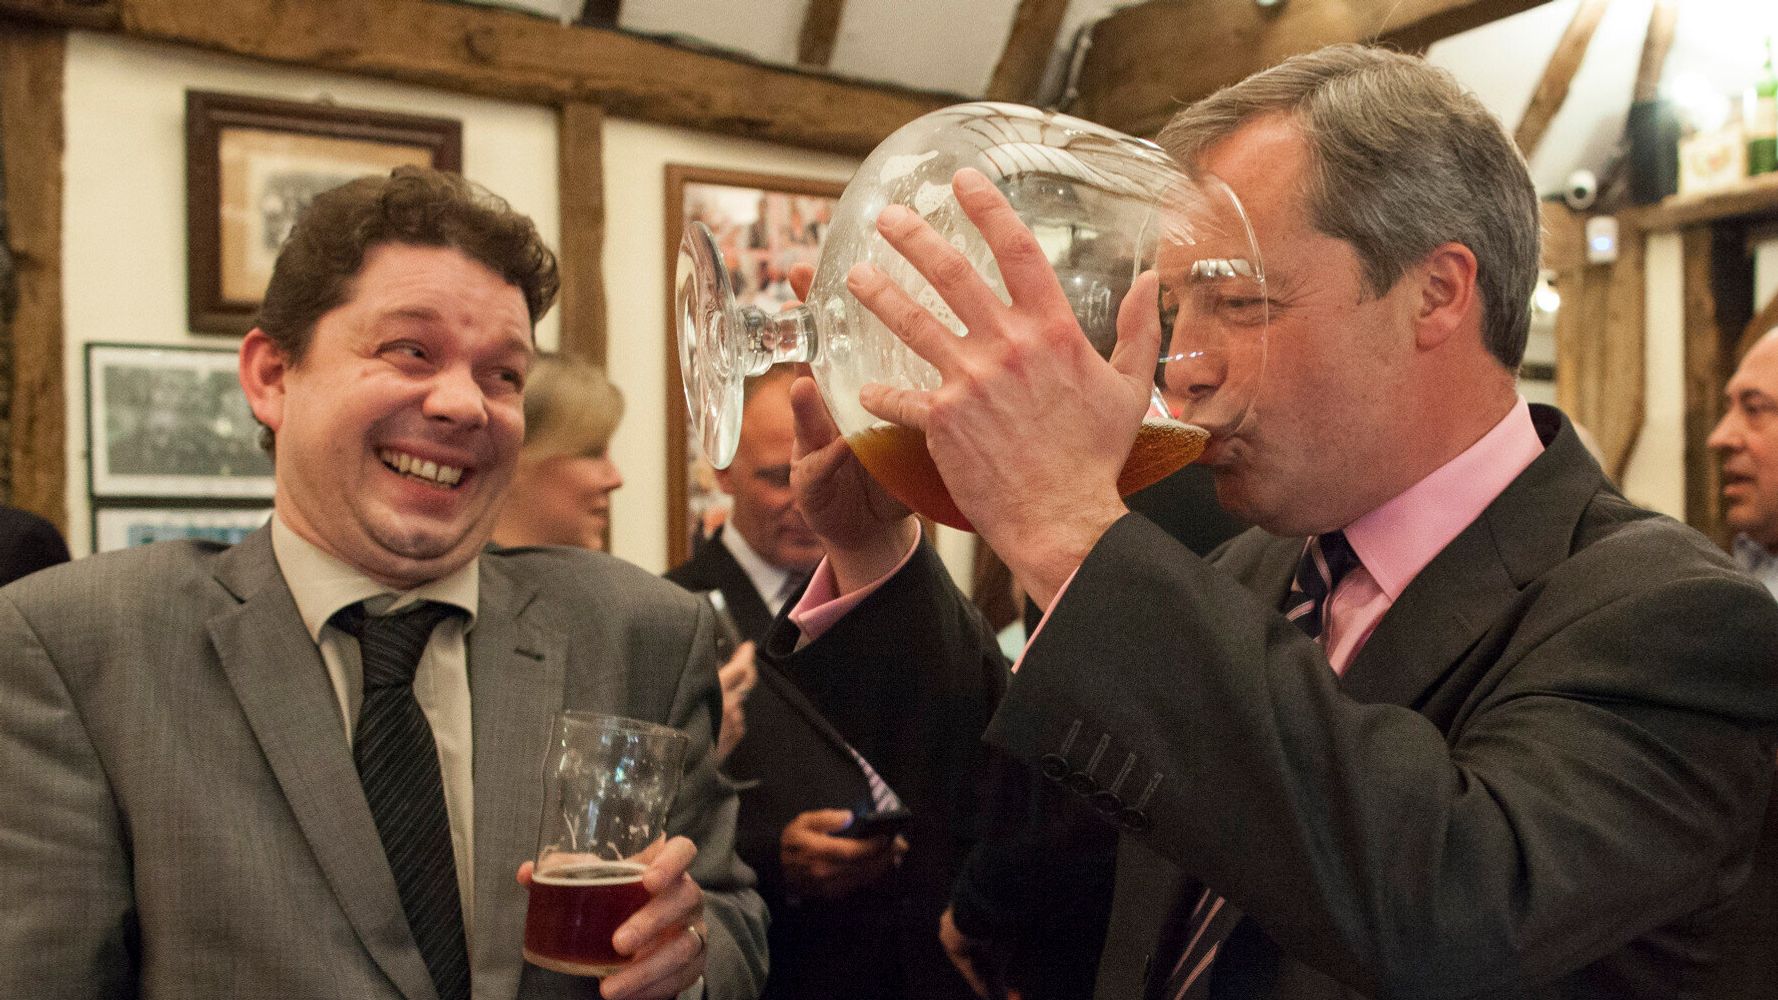 Nigel Farage Drinks Insanely Large Glass Of Beer, Looks Very Happy ...